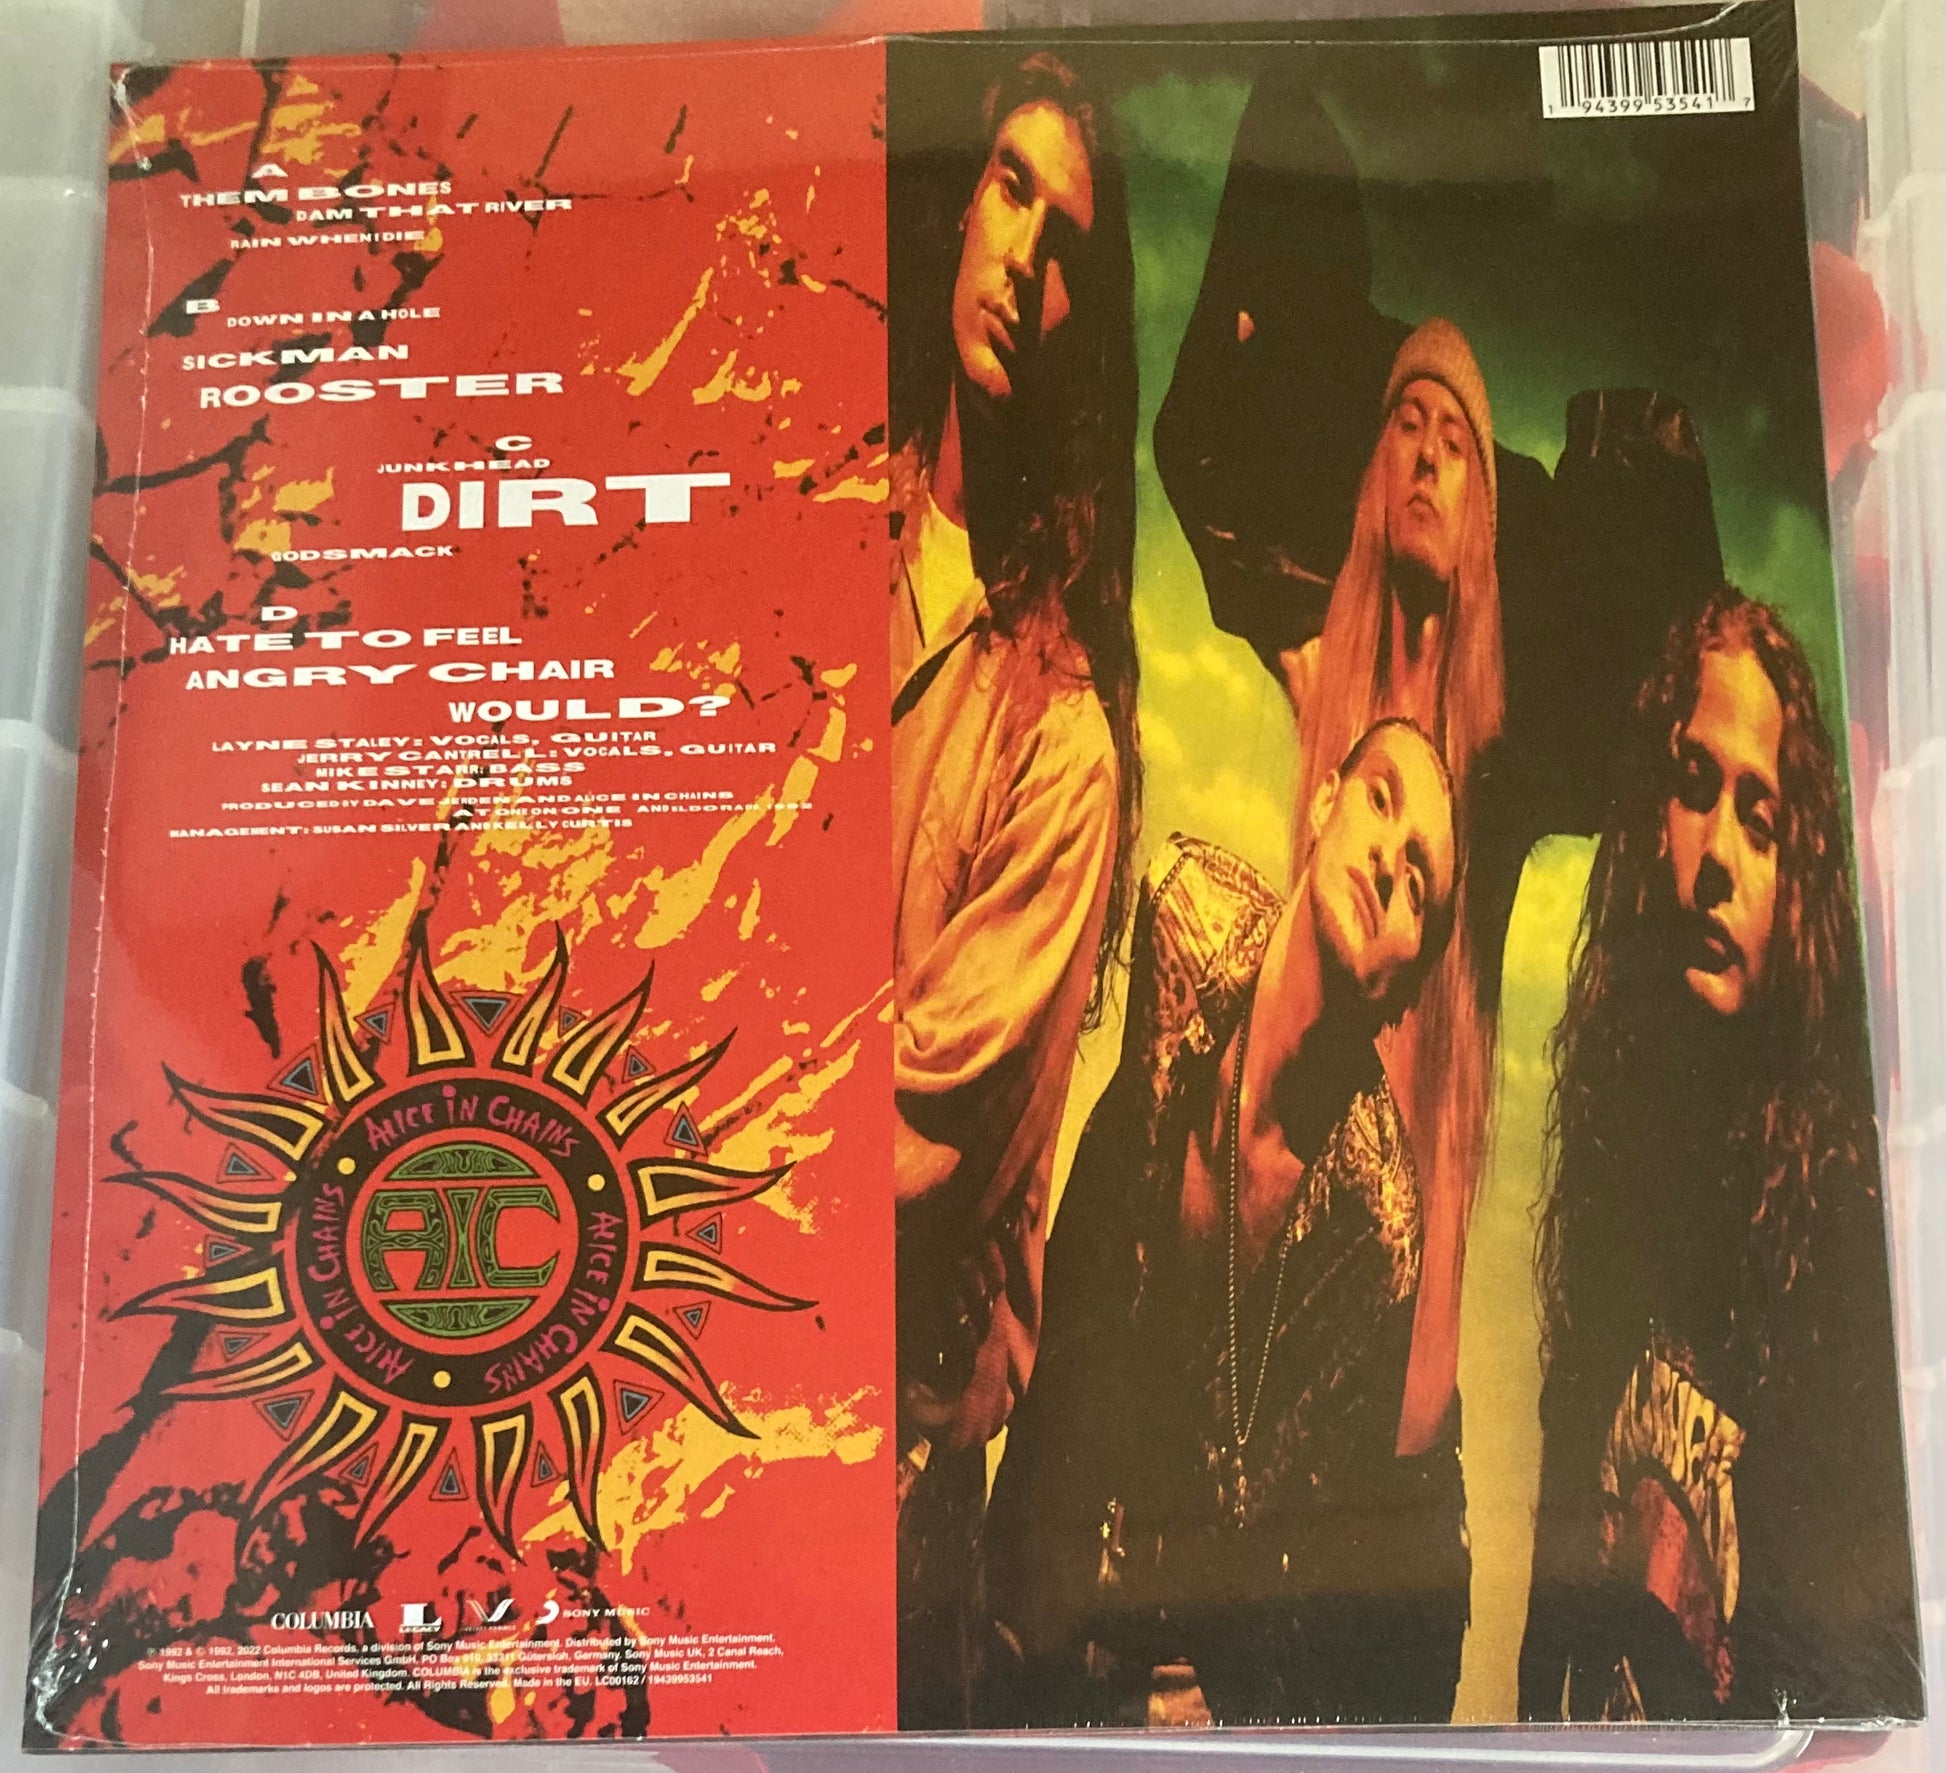 The back of 'Alice in Chains - Dirt' on vinyl